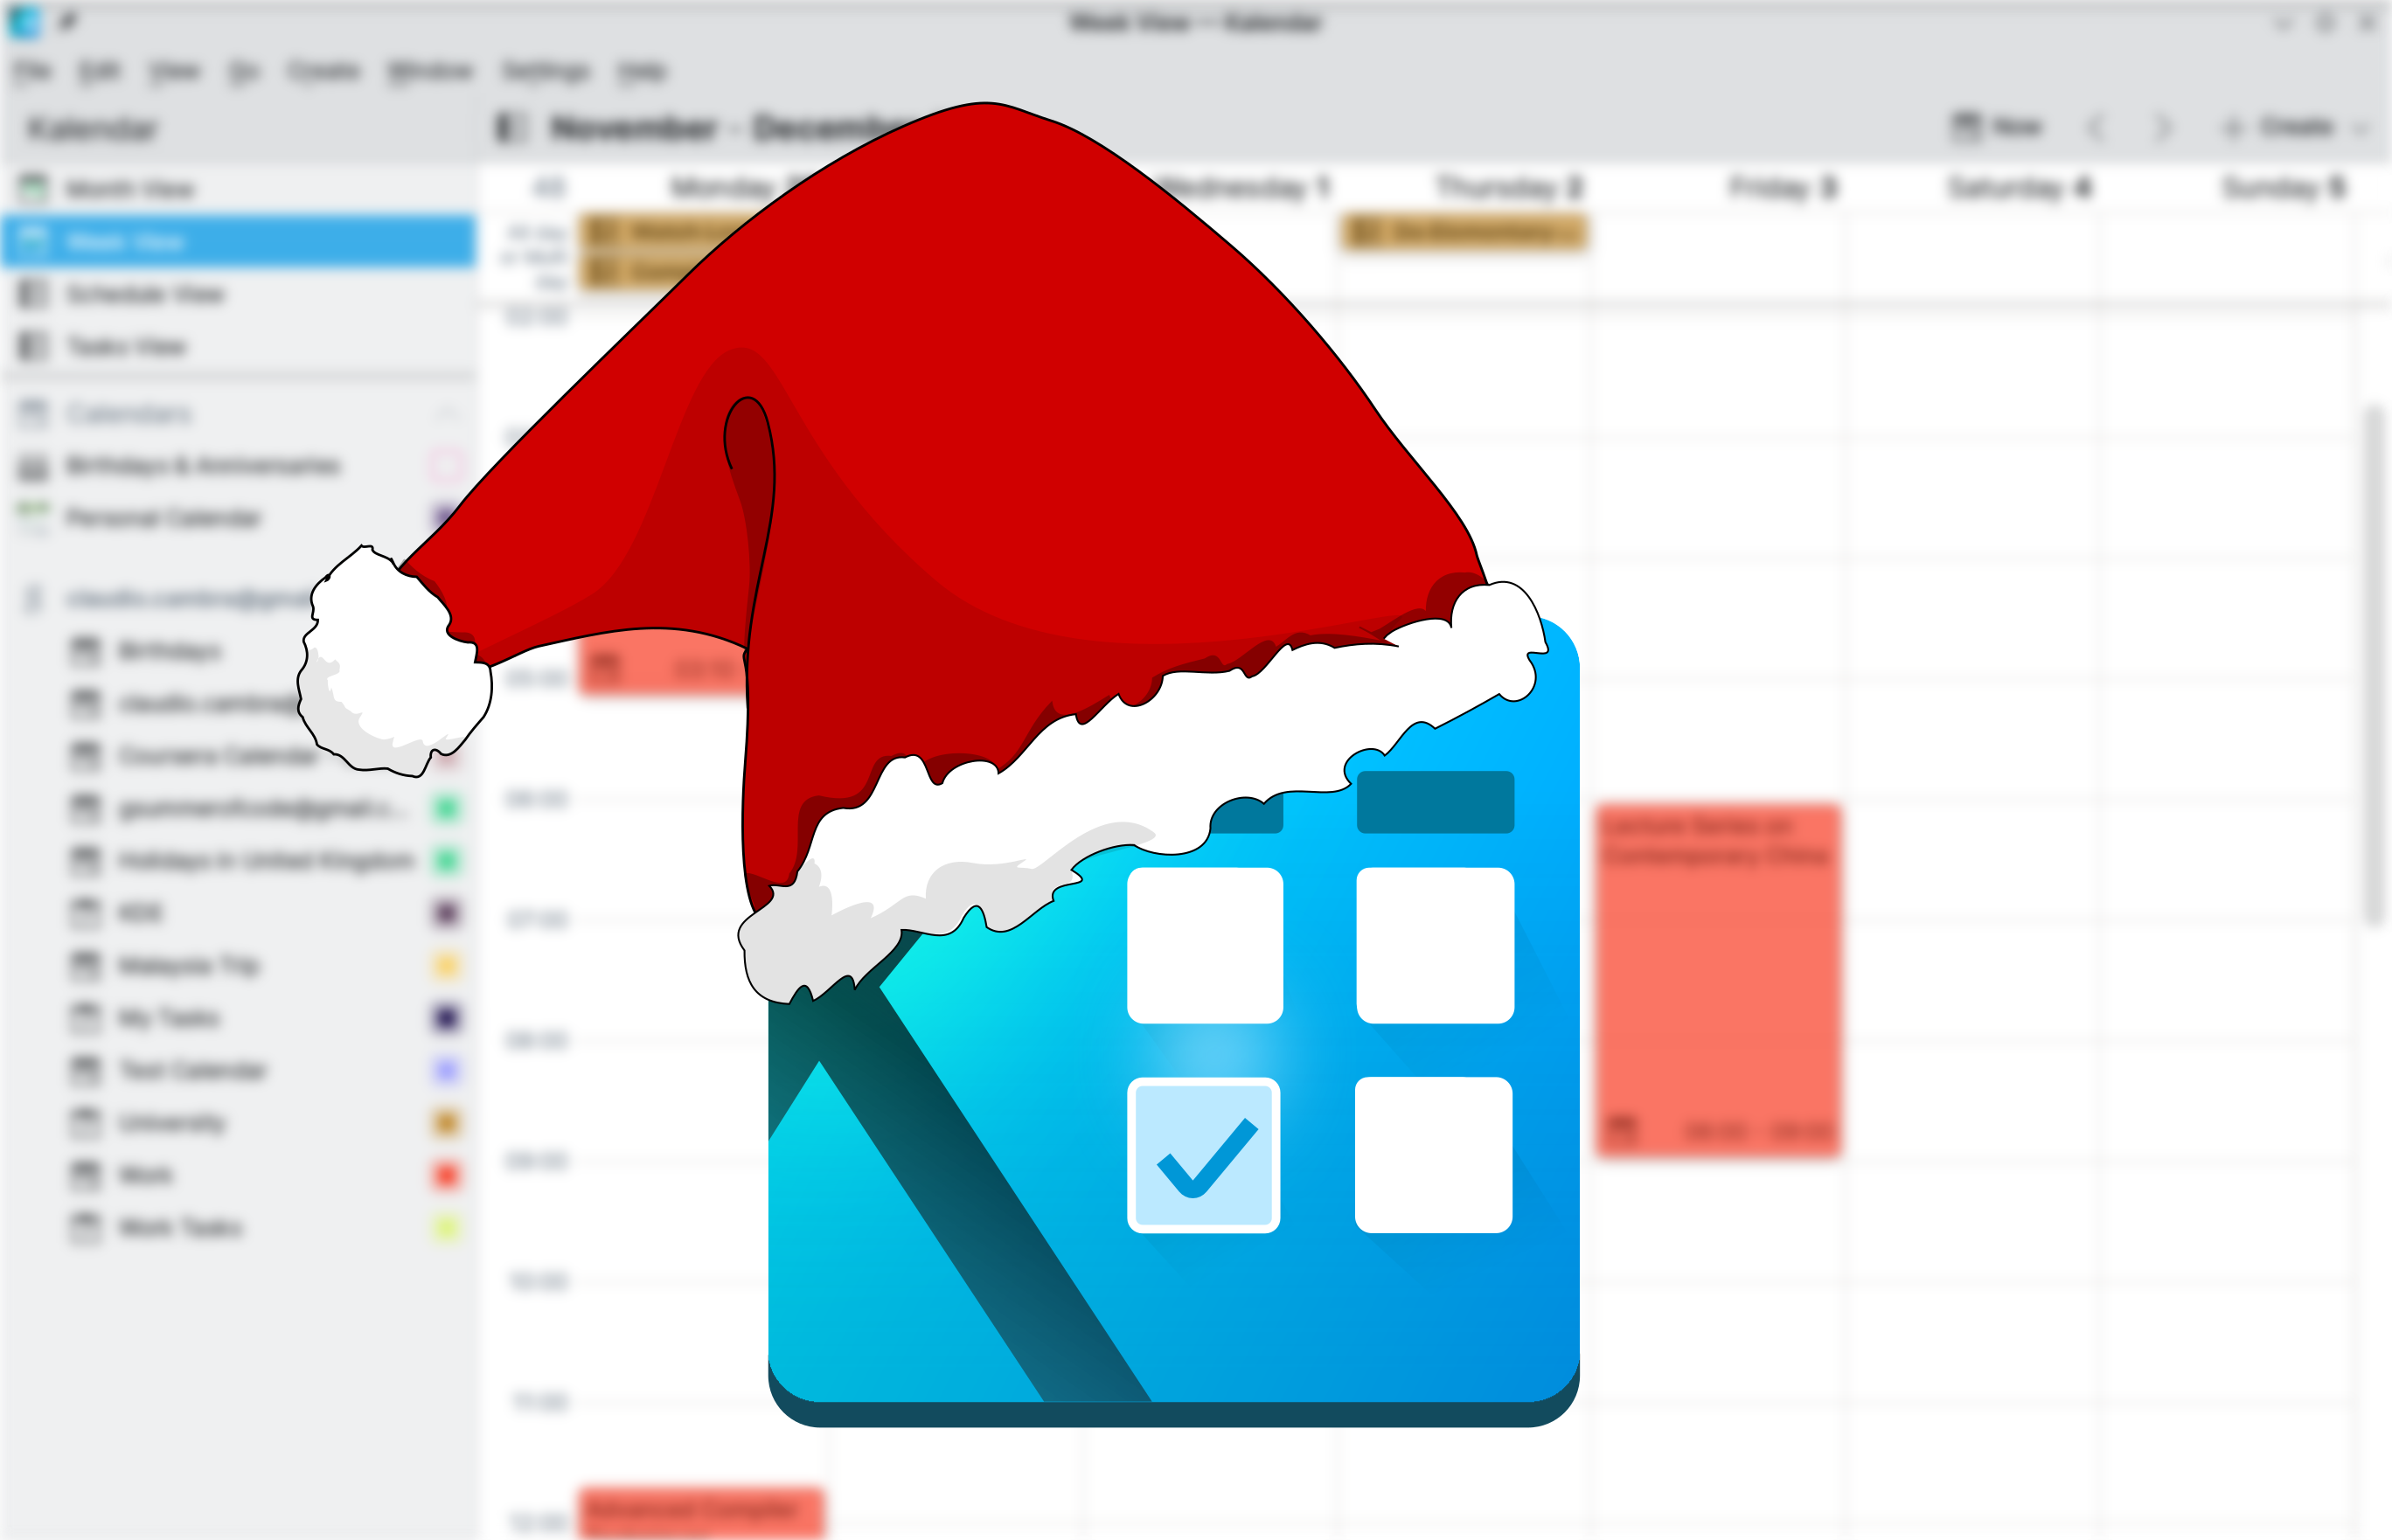 Happy holidays! Kalendar v0.4.0 is our gift, and it brings new views, improved performance, and many many bugfixes – Kalendar devlog 24